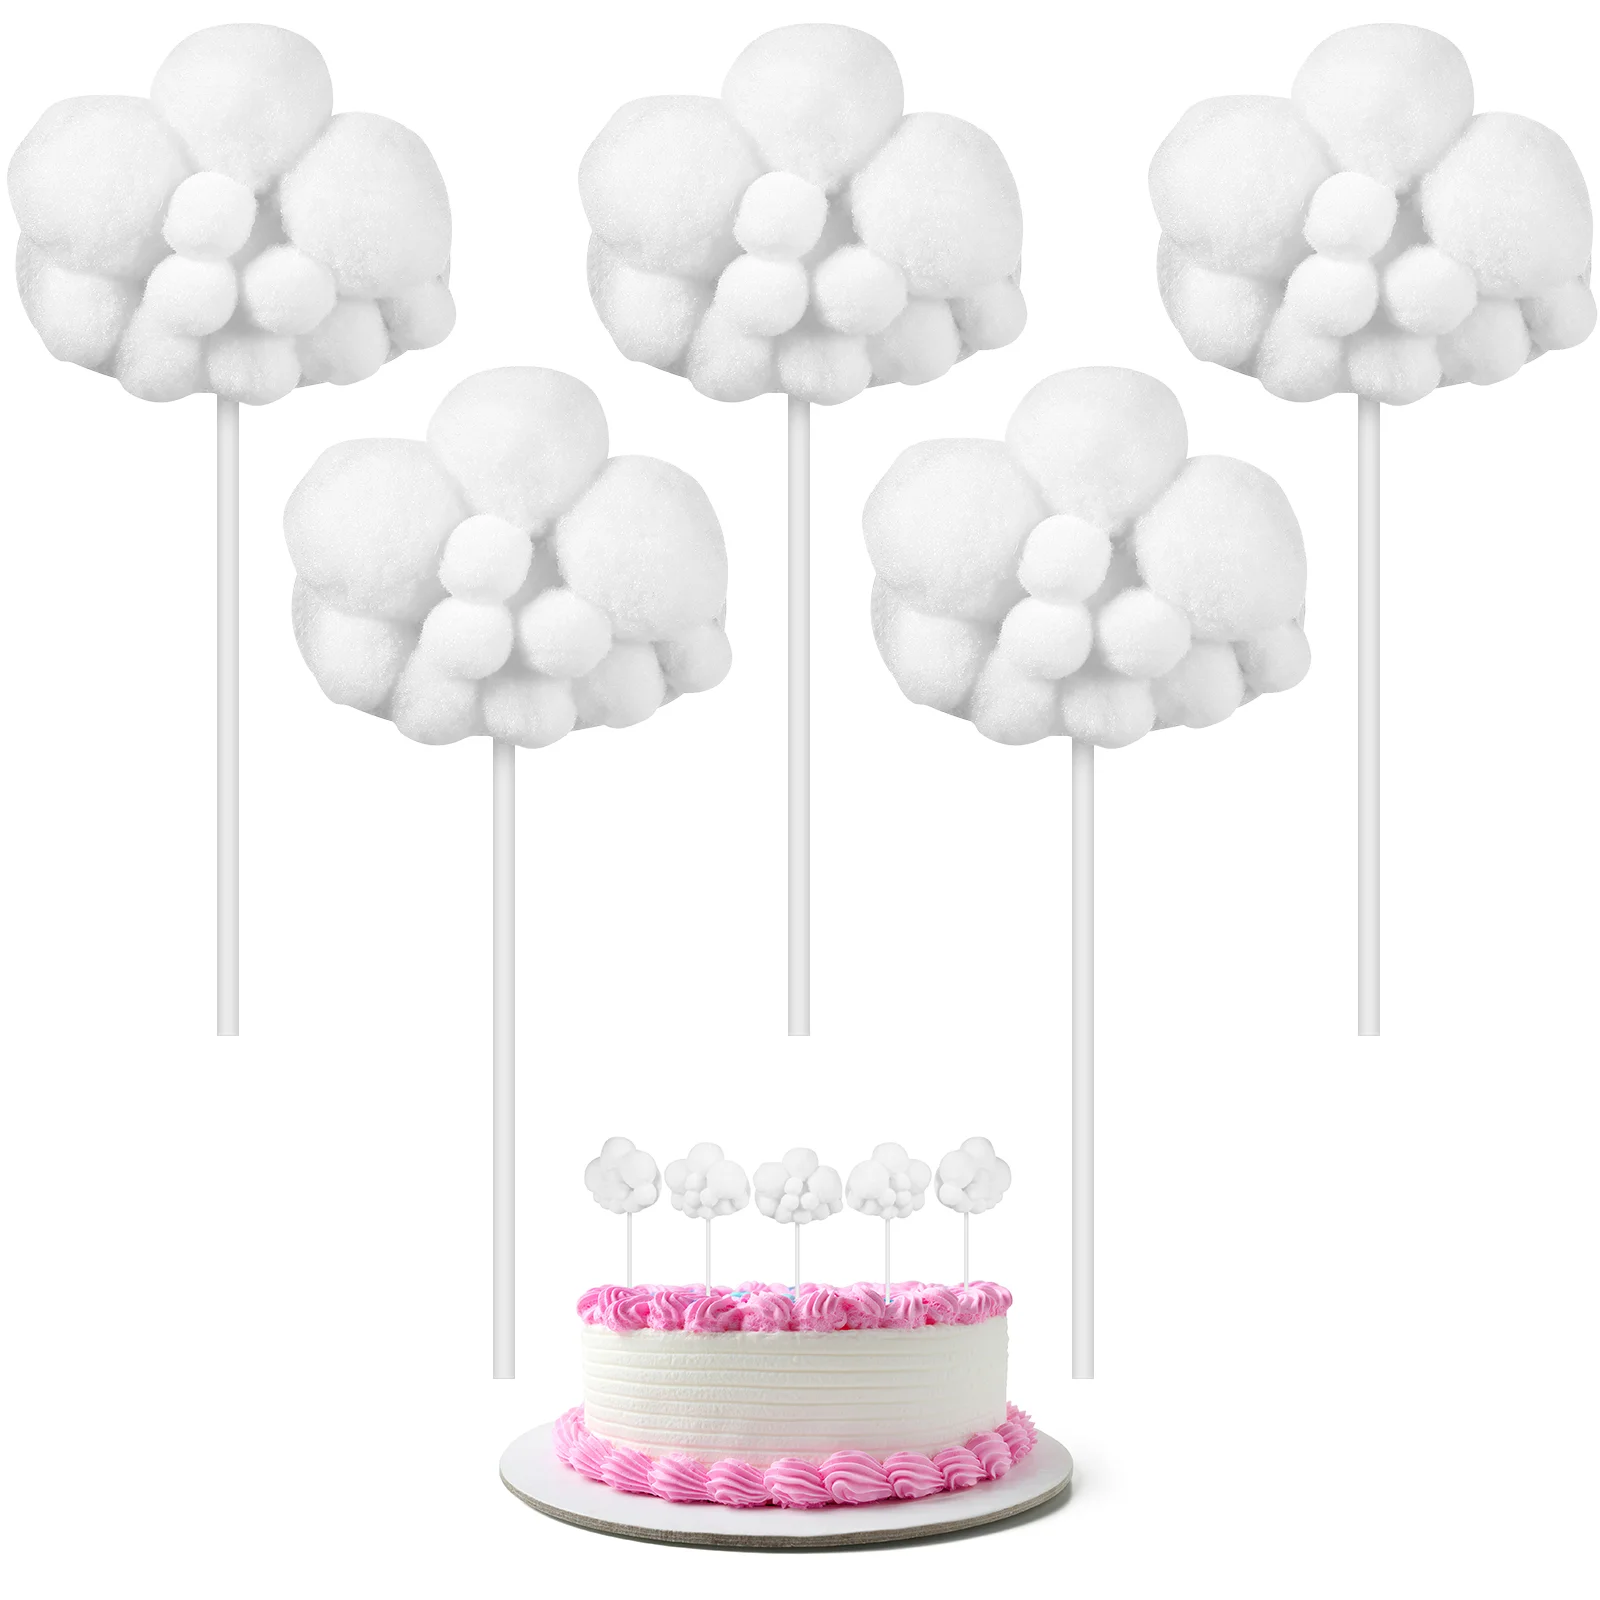 

5 Pcs Cupcake Ornament Cloud Cake Decorations Cake Snack Picks Cake Suppliers Baby Shower Cupcake Toppers Cloud Cupcake Topper